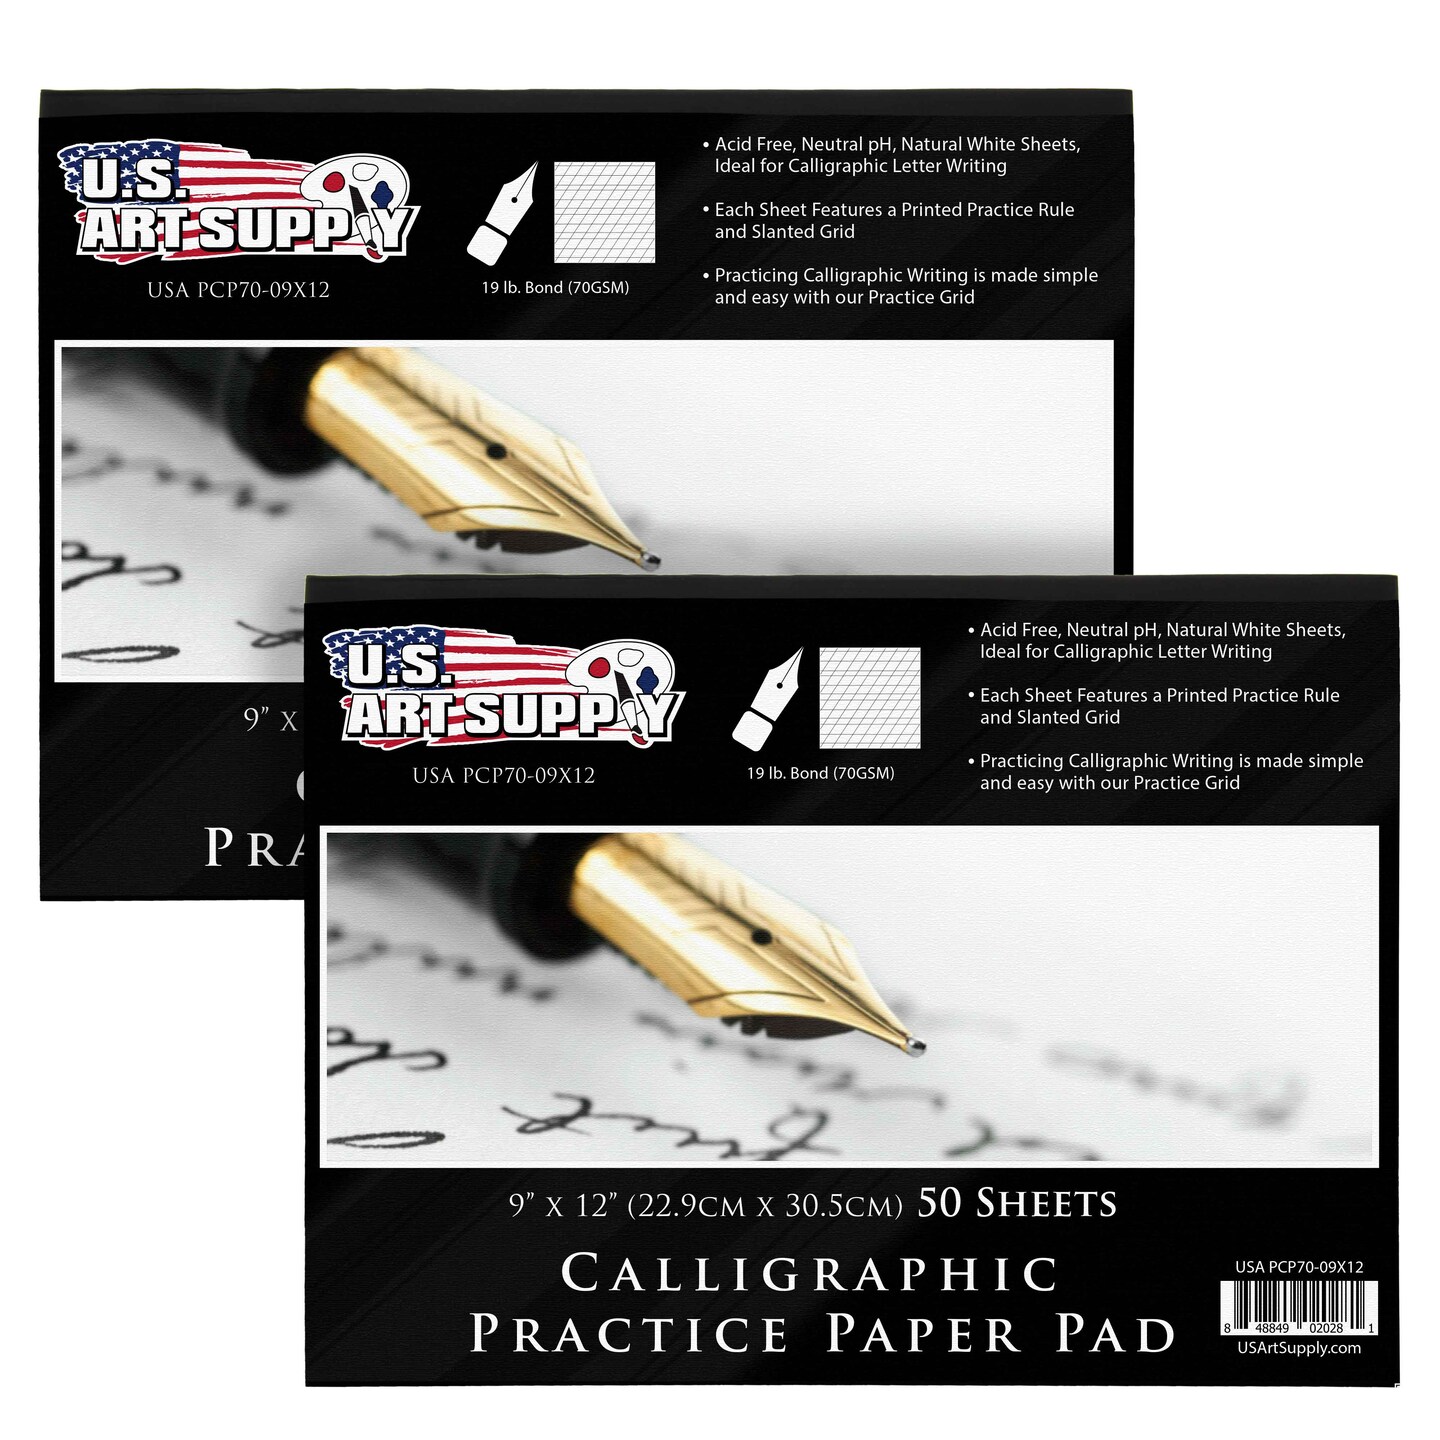 6 Pack: Canson® XL® Watercolor Pad